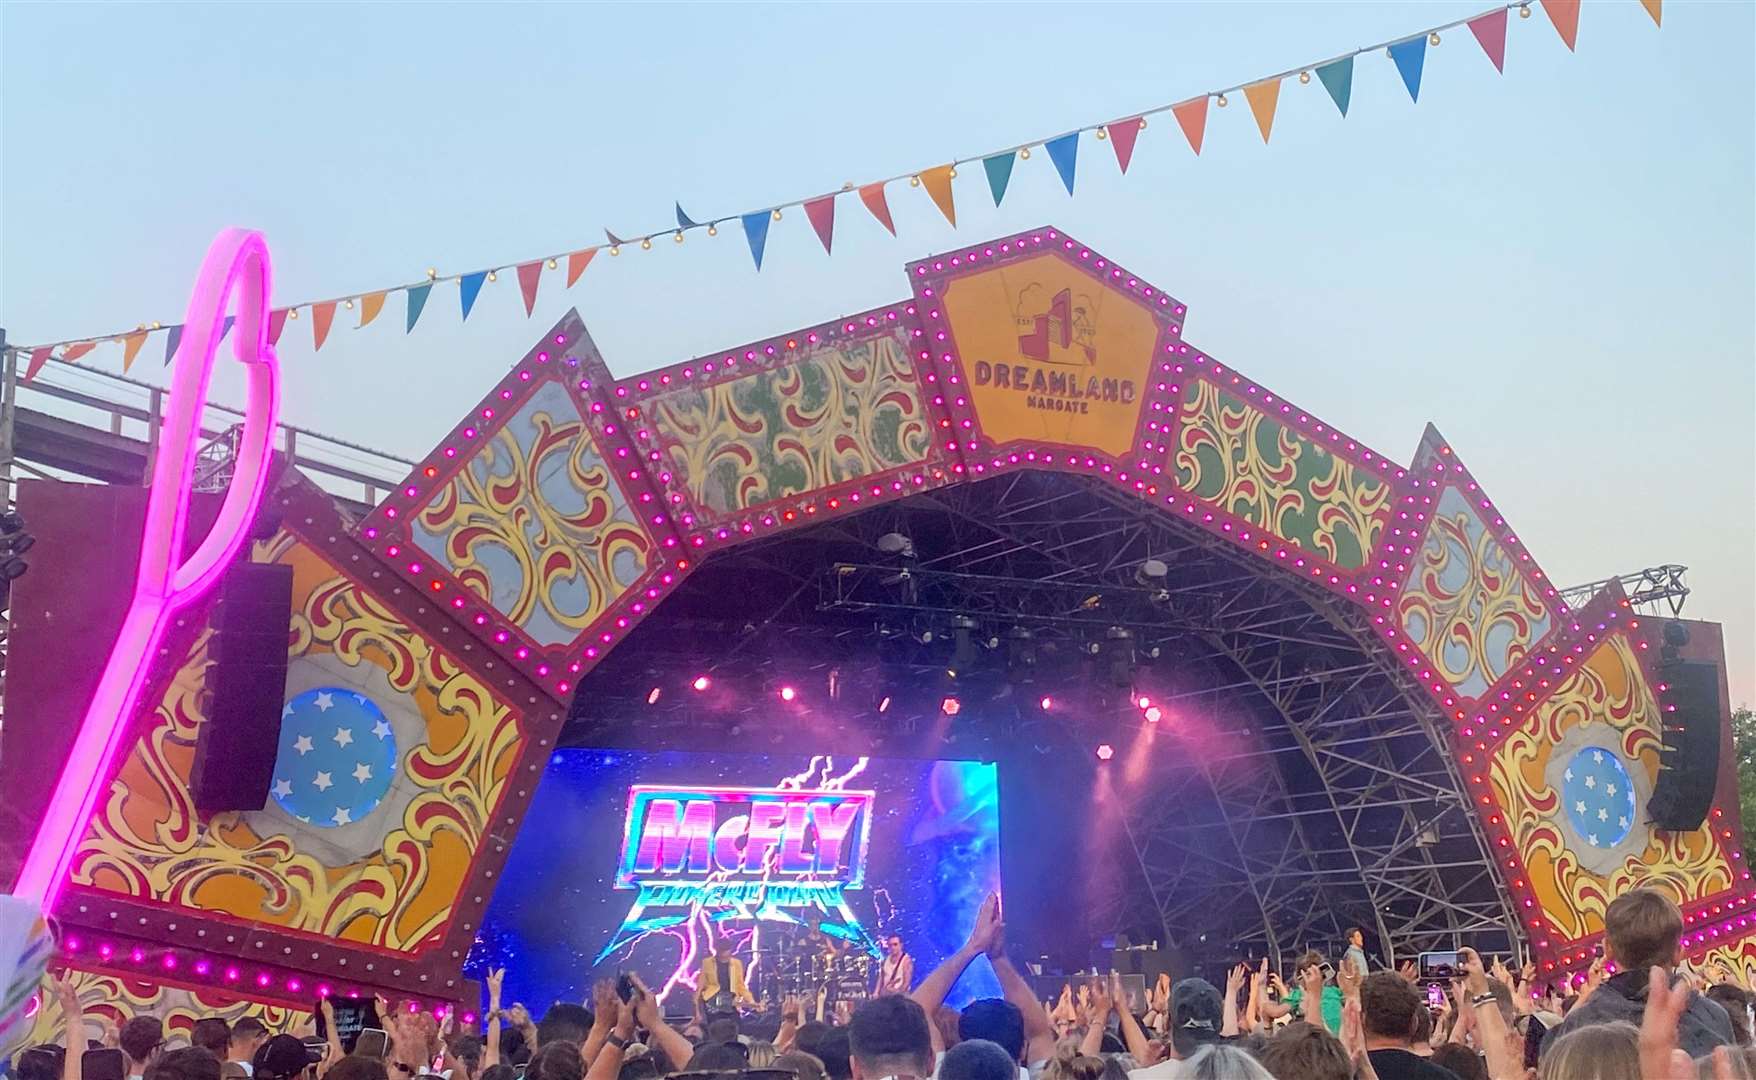 Dreamland will welcome artists such as Busted, Becky Hill and Status Quo to its outdoor Scenic Stage. Picture: Sam Lawrie